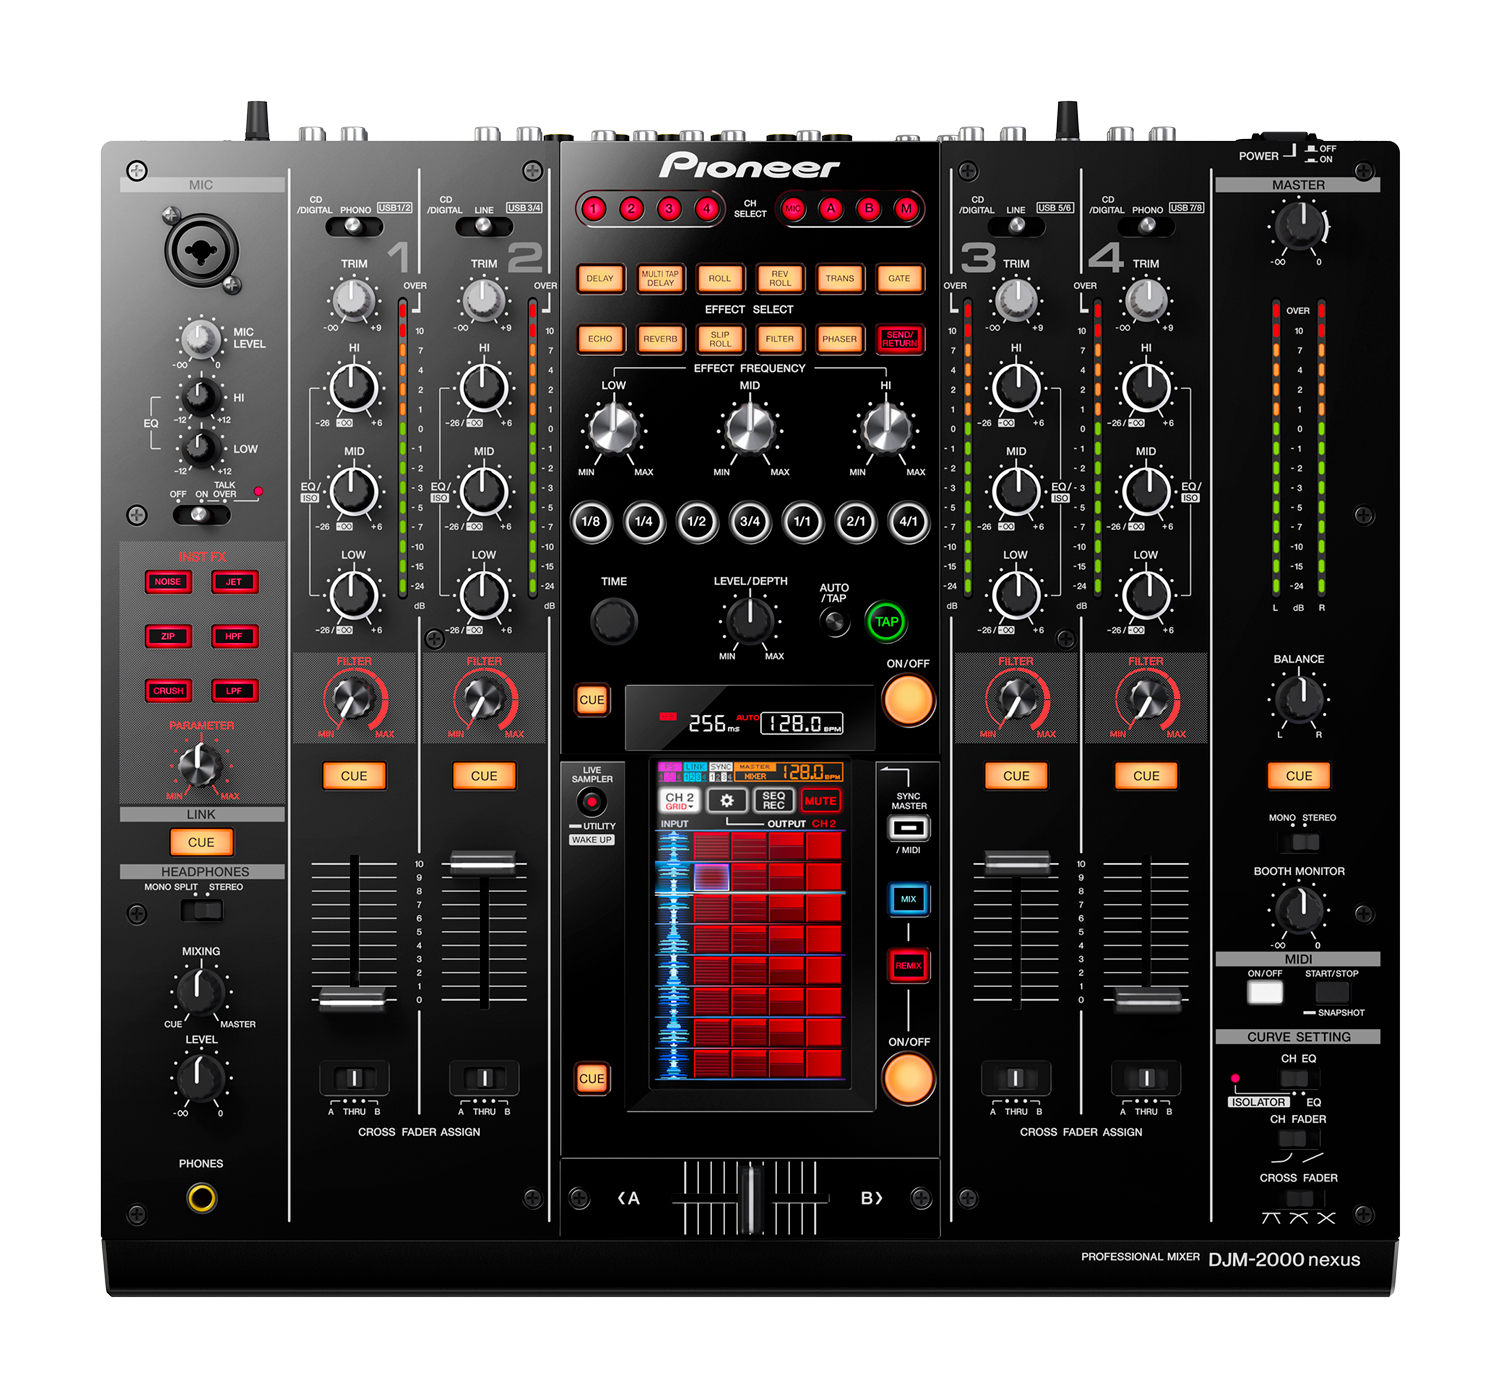 The DJM-2000NXS boasts LAN terminals for connecting up to 4 multiple players 2 and up to 2 PCs at the same time, Built-in USB audio interface that can assign audio systems of up to 4 systems to each channel from a single PC, Switchable 3 band EQ and 3 band ISOLATER on each channel (control from +6 dB to -26 dB with EQ, and +6 dB to -8 dB with ISOLATER), Digital input terminals on each channel that allow audio signals to be input without affecting sound quality, Talk Over that lowers the volume of tracks automatically when there is a signal input via the microphone, Peak Level Meter on all channels that allow the input level input to each channel to be checked in an instant, Cross Fader Assign to assign cross faders flexibly to each channel input, Fader Curve Adjust function that allows the cross fader and channel fader curve to be changed, Environmentally-friendly Auto Standby Function that switches the power to standby mode when there is no operation or input for a certain period of time, Pioneer DJ CD player can be used for fader, start or play functions via a link to the fader control using a PRO DJ LINK connection or a control cable, Convenient for club or studio as it is, dimensions 430 x 404 x 108mm , Call +91 9844701999 to rent it for your next gig!